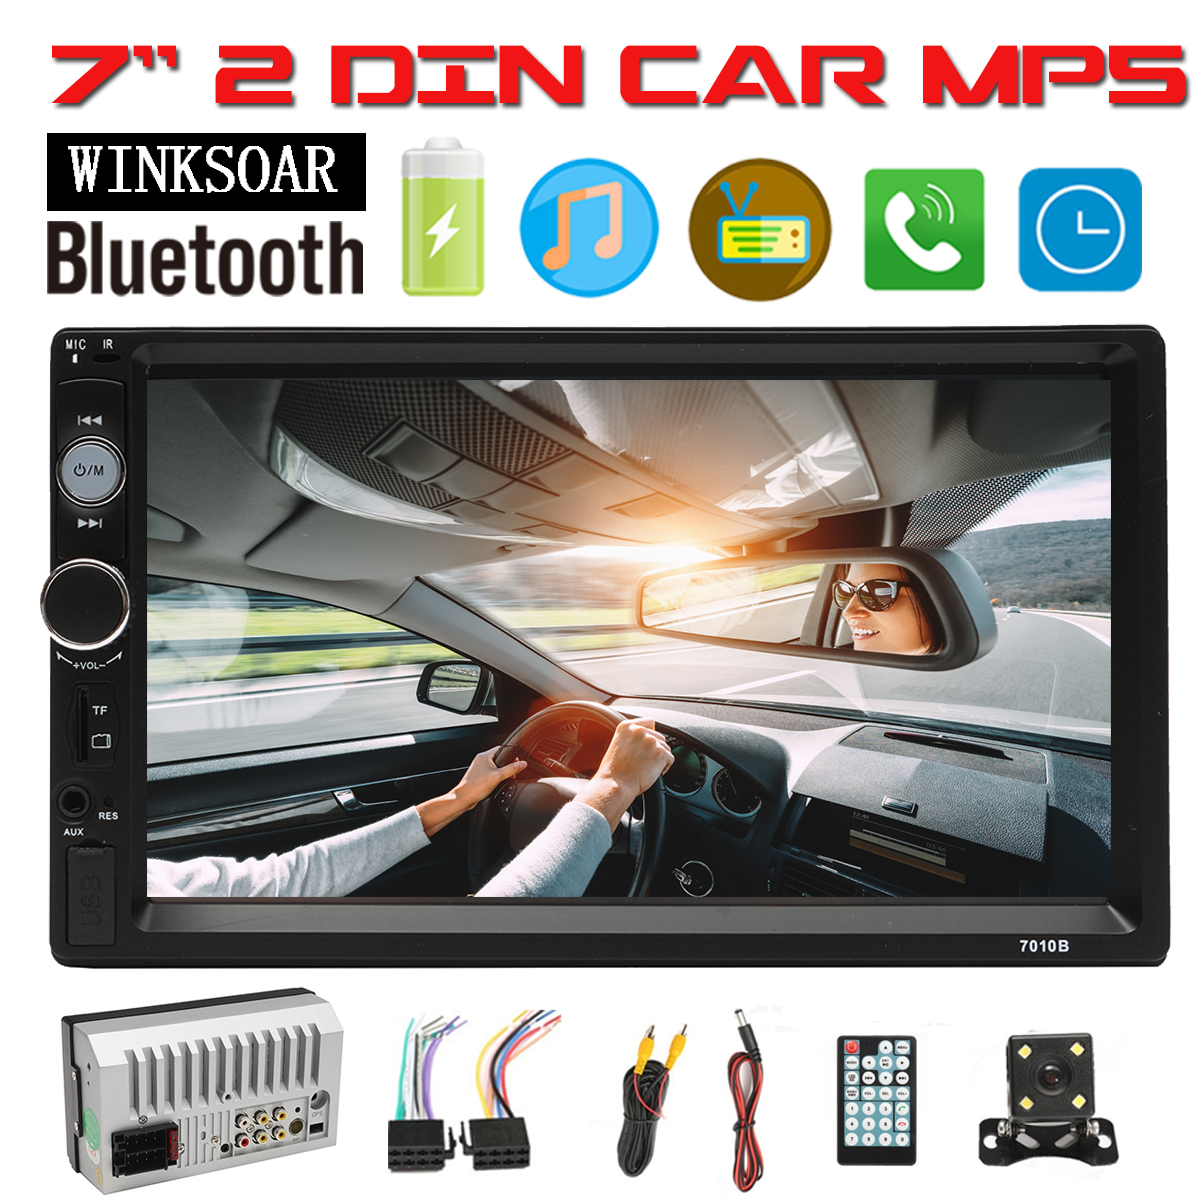 Camera 7inch 2 Double DIN Car Stereo Radio MP5 MP3 Player Bluetooth FM USB AUX